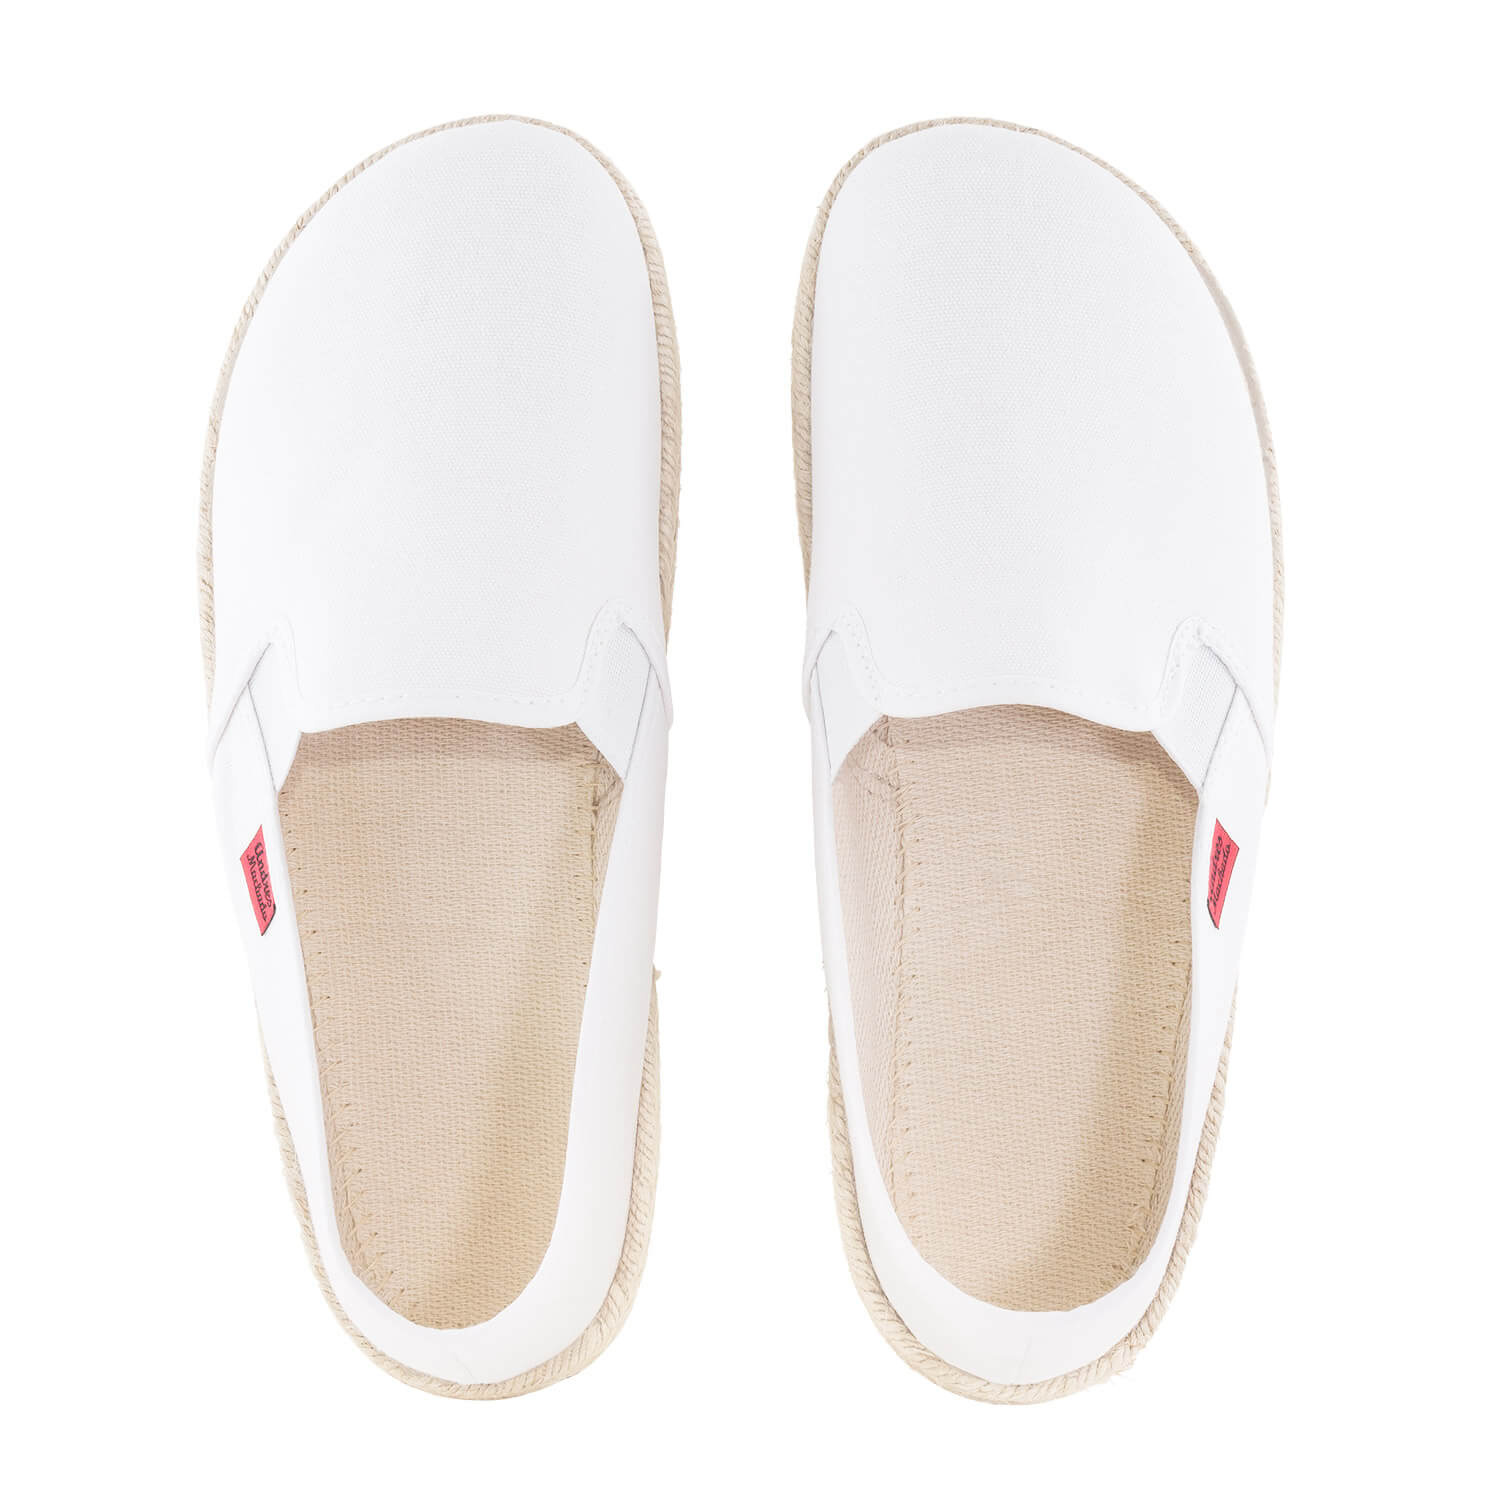 Mythical White Canvas Slip-On Shoes with Rubber and Jute Sole 